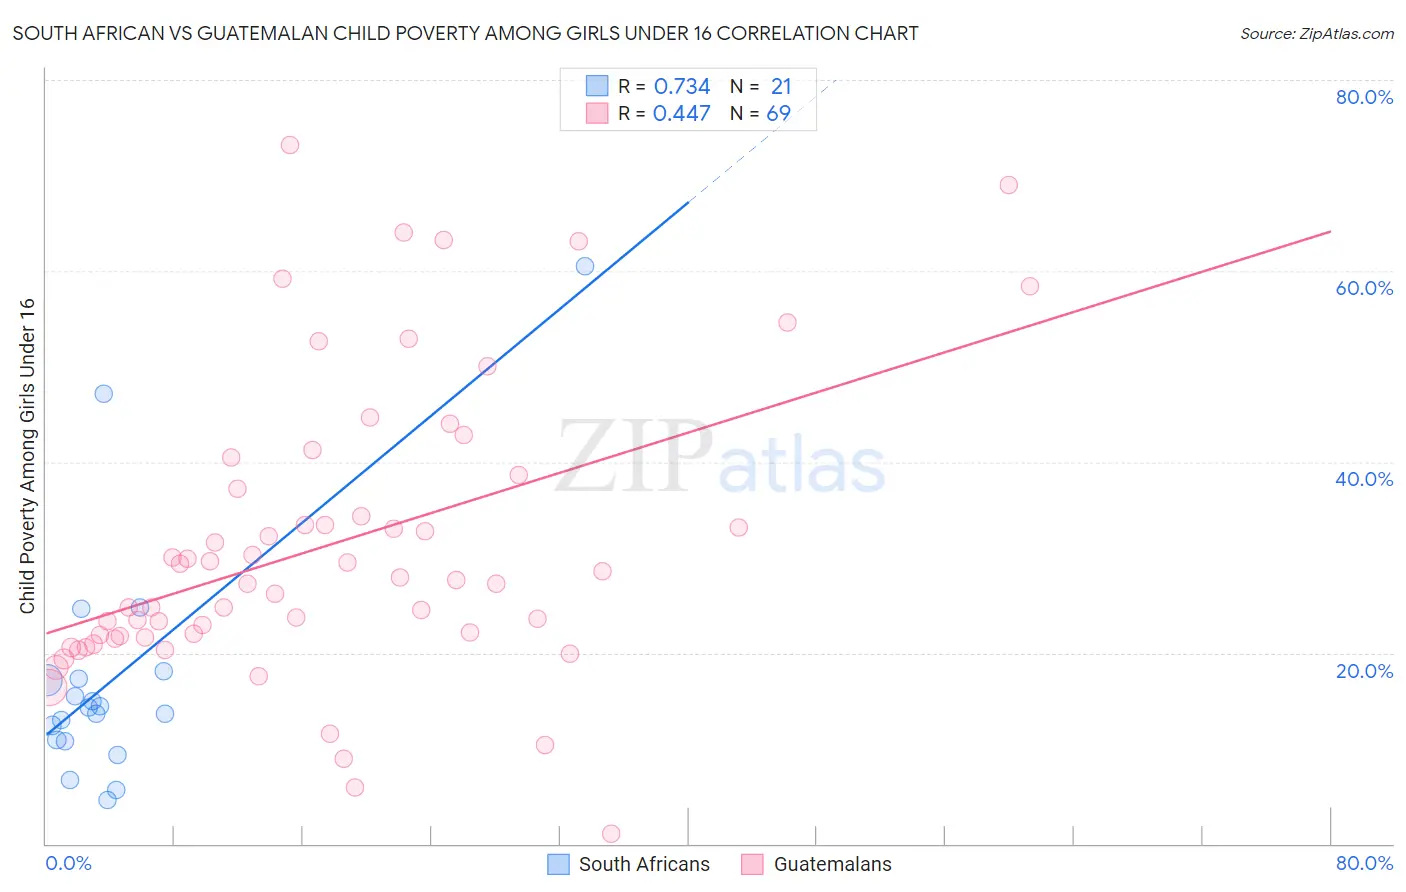 South African vs Guatemalan Child Poverty Among Girls Under 16